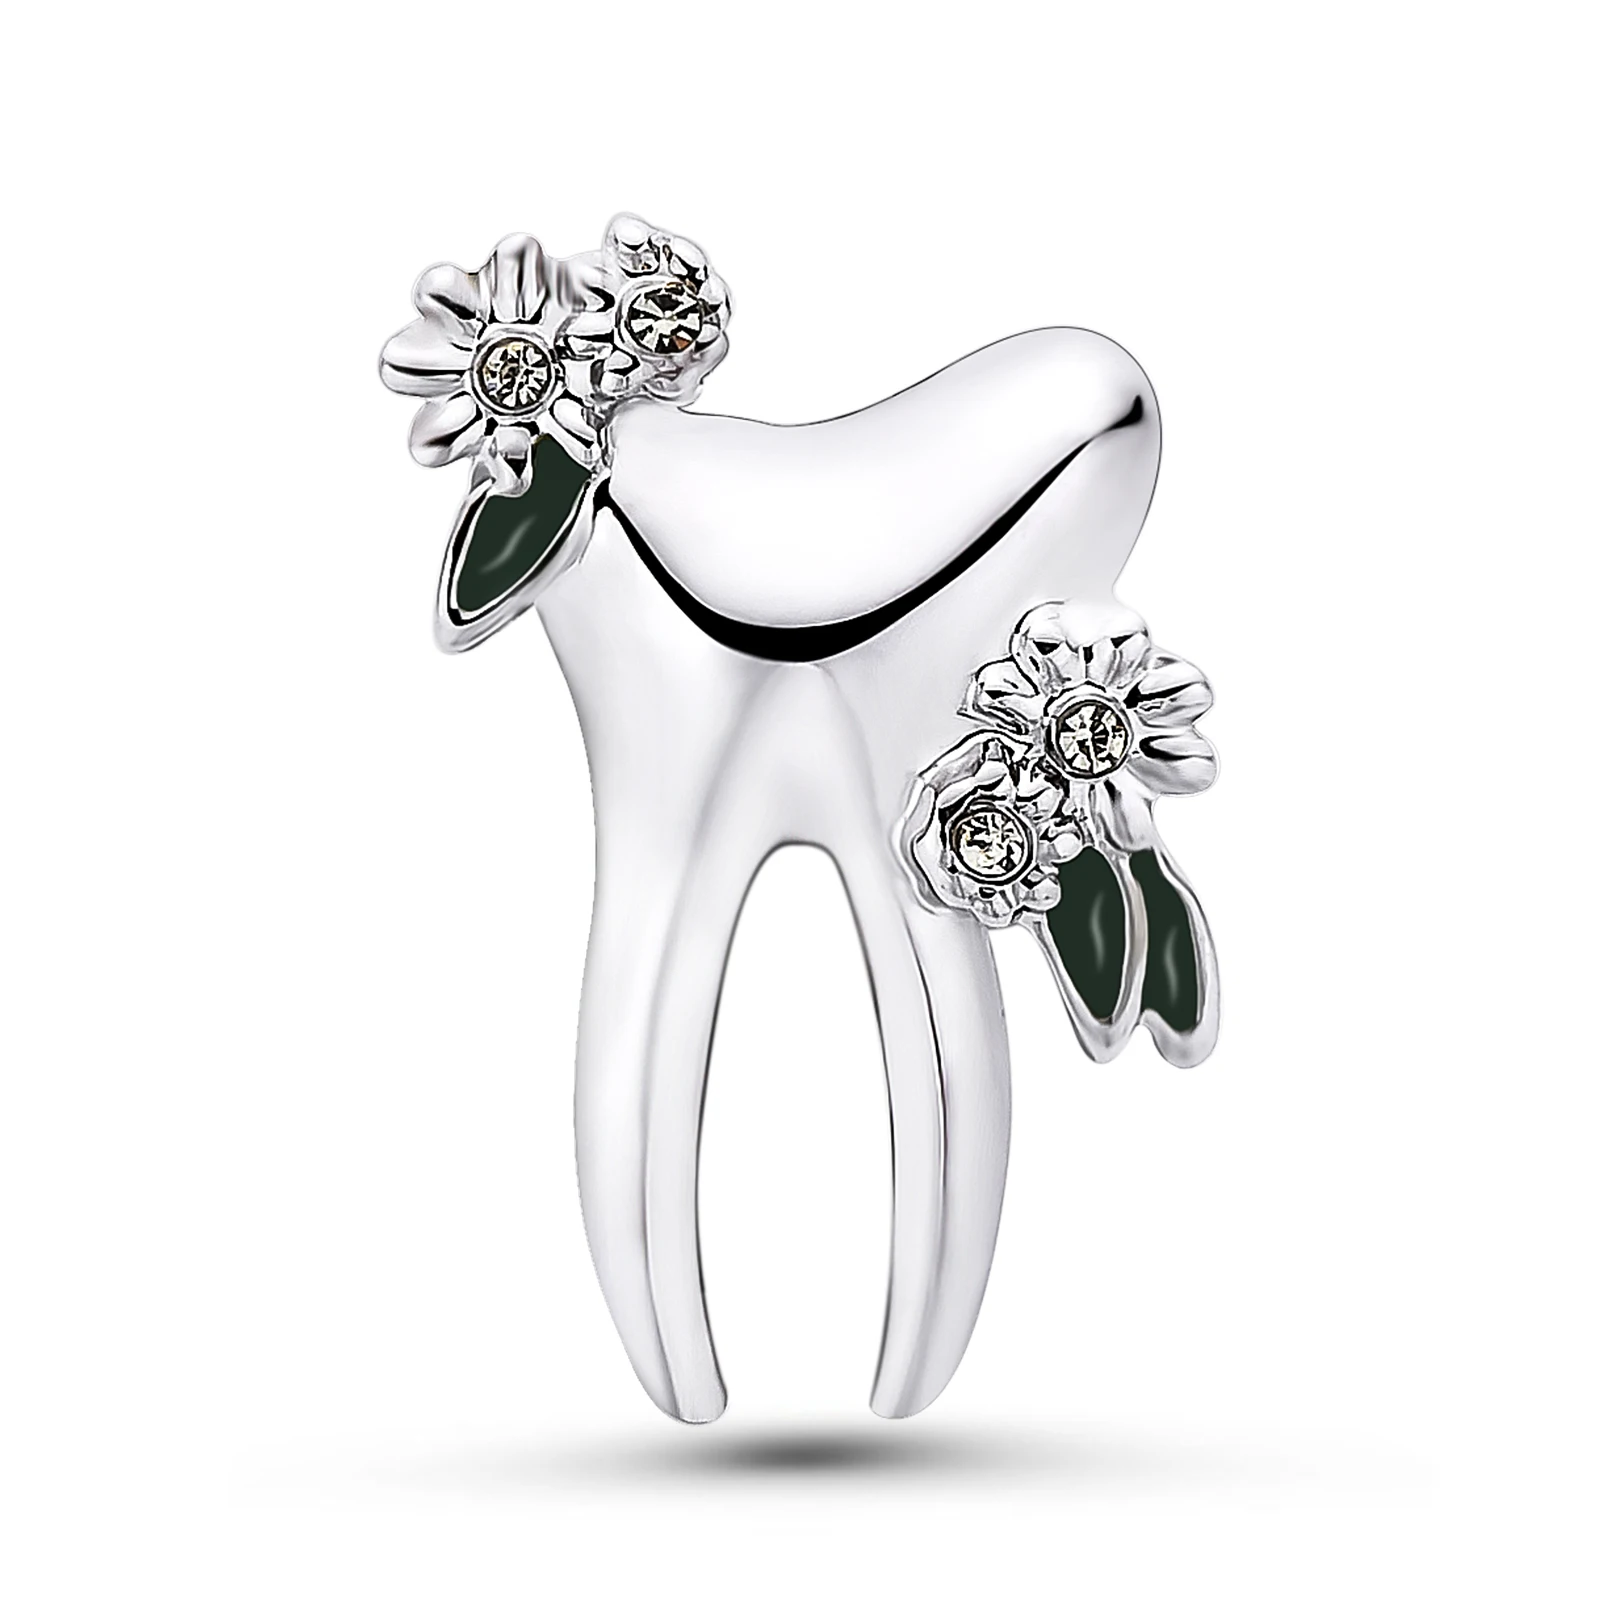 

Creativity Flower Tooth Brooch Pins Dental Medical Jewelry Gift Lapel Badge for Dentist Doctor Nurse Medicine Student